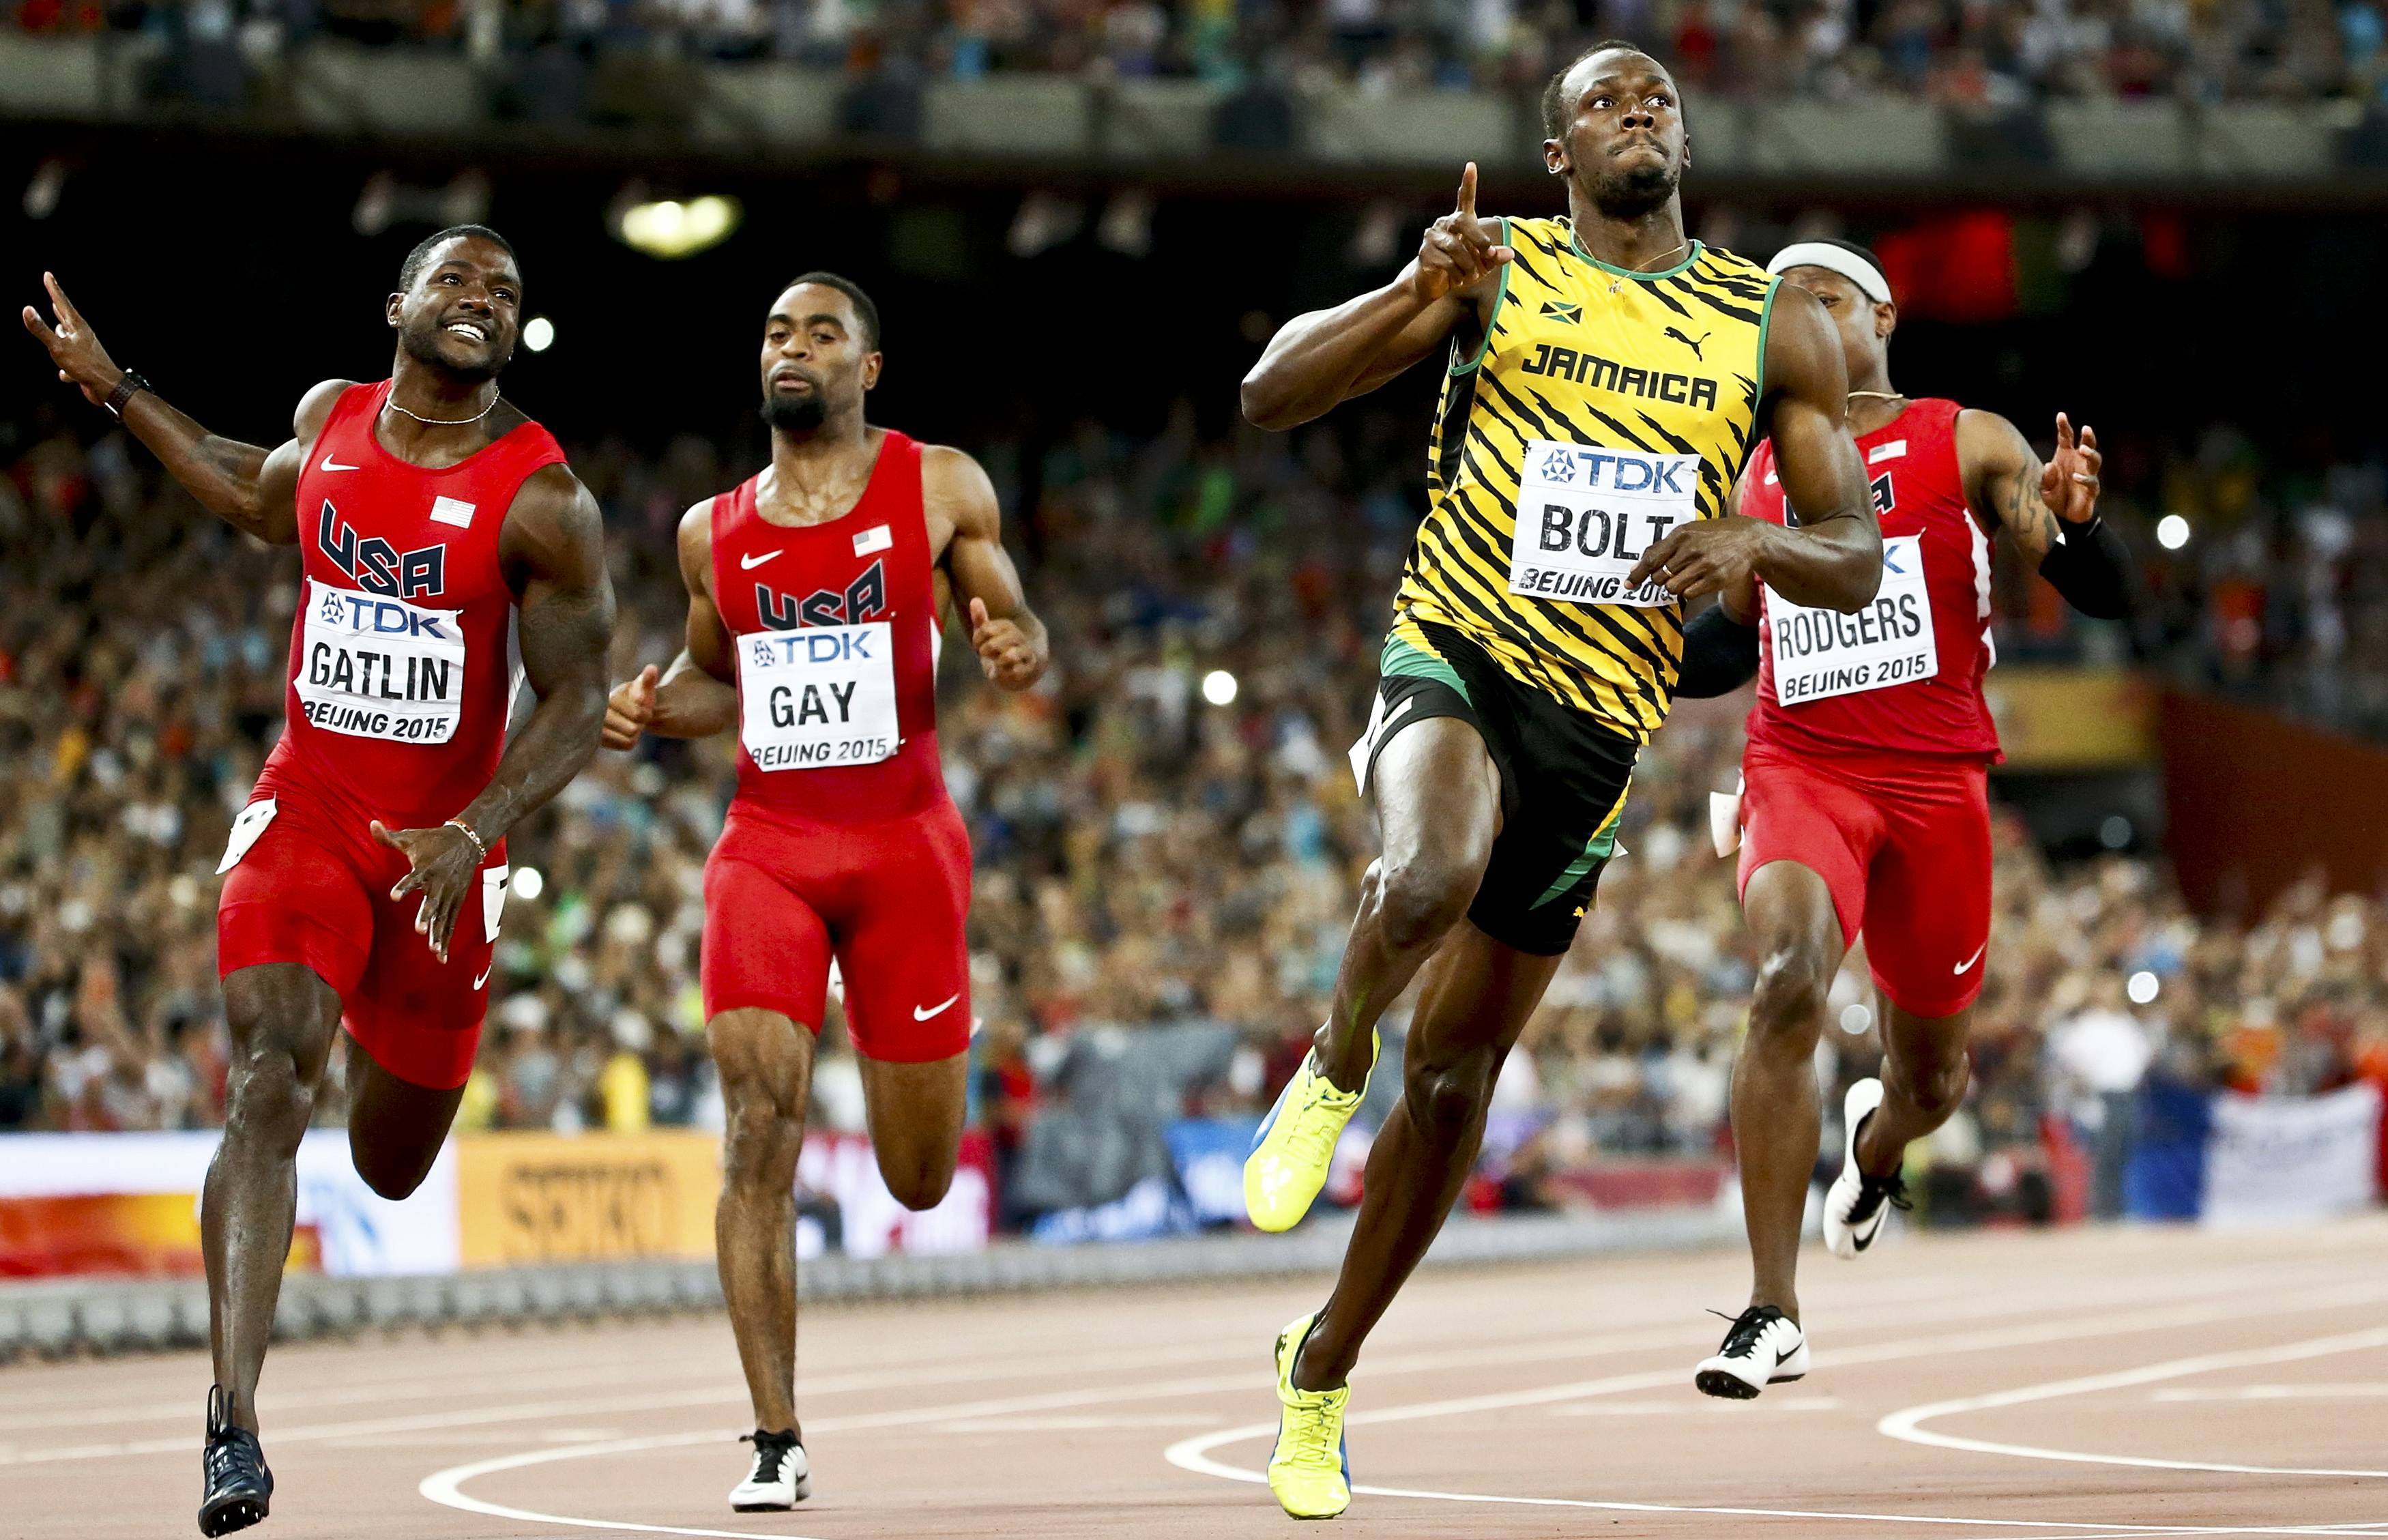 Justin Gatlin and Tyson Gay from the U.S. and Usain Bolt (L-R) of Jamaica compete in the men's 100m final during the 15th IAAF World Championships at the National Stadium in Beijing, China August 23, 2015.  REUTERS/Lucy Nicholson